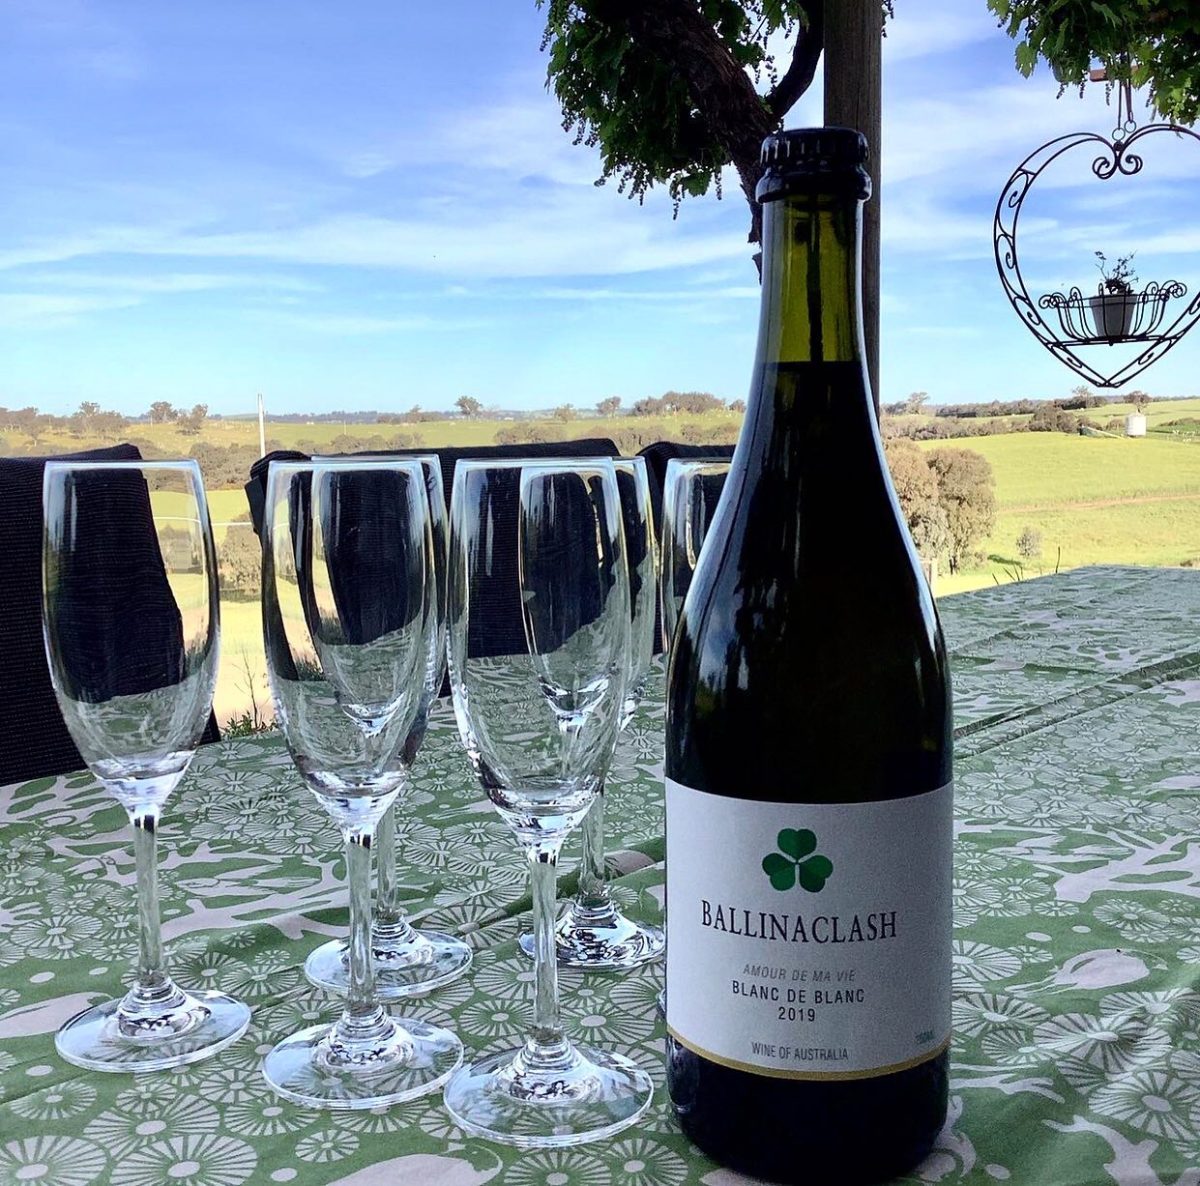 A bottle of Ballinaclash wine next to several glasses, with blue sky behind them